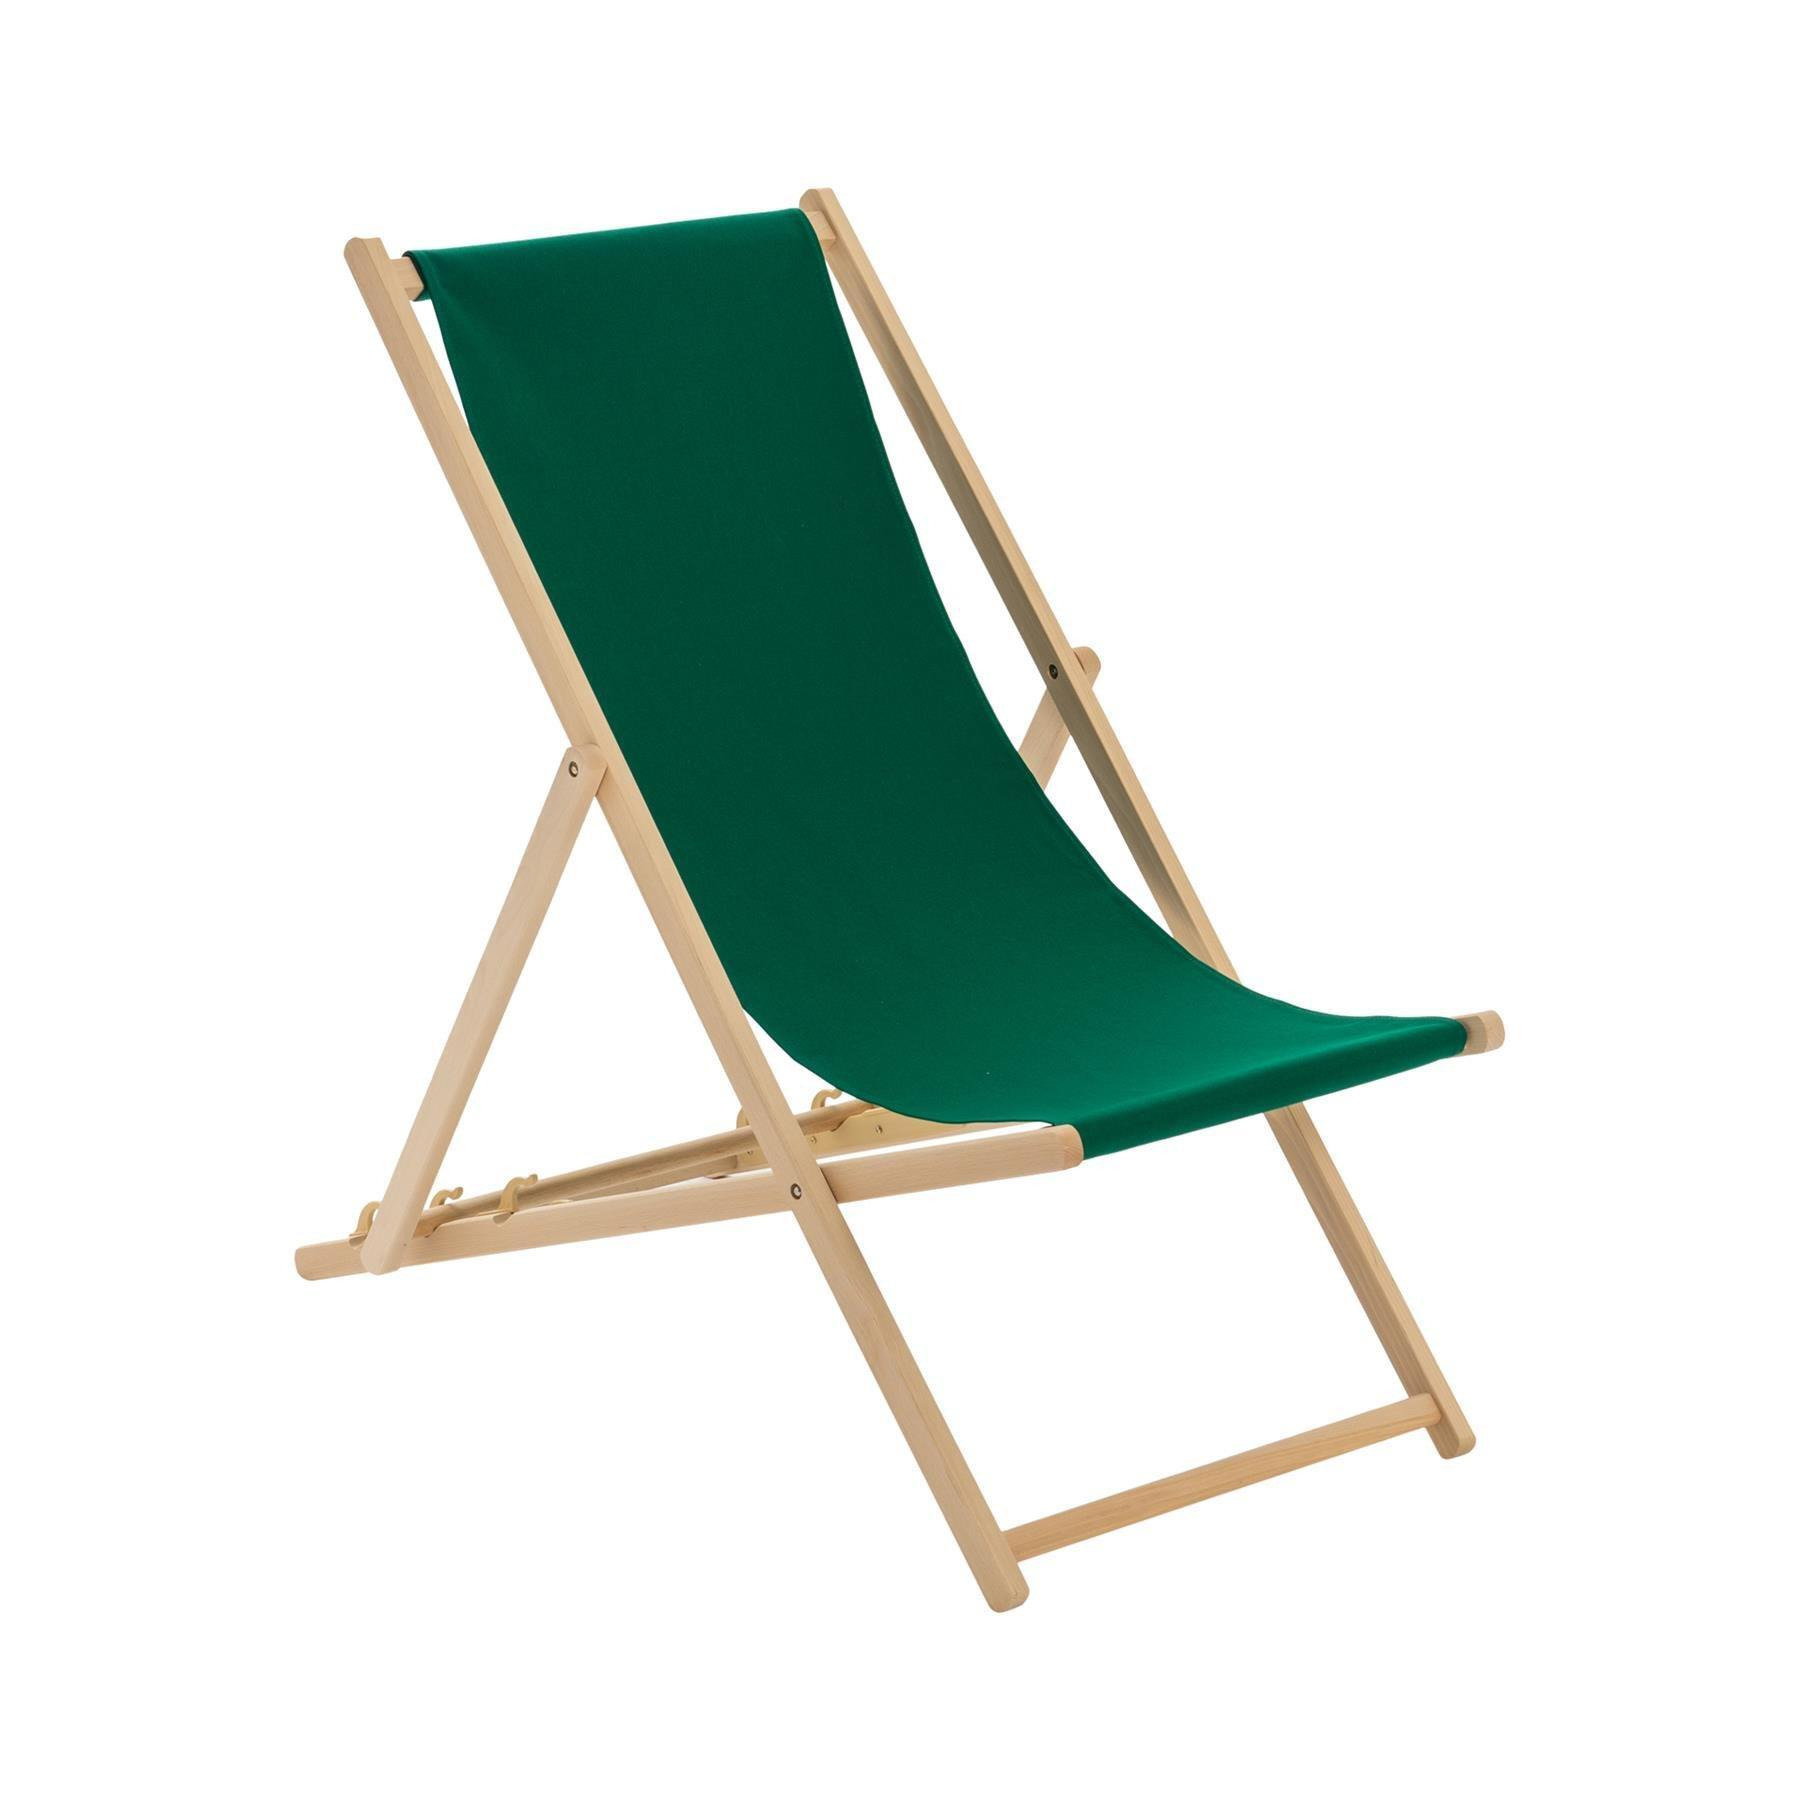 Folding Wooden Deck Chair - image 1